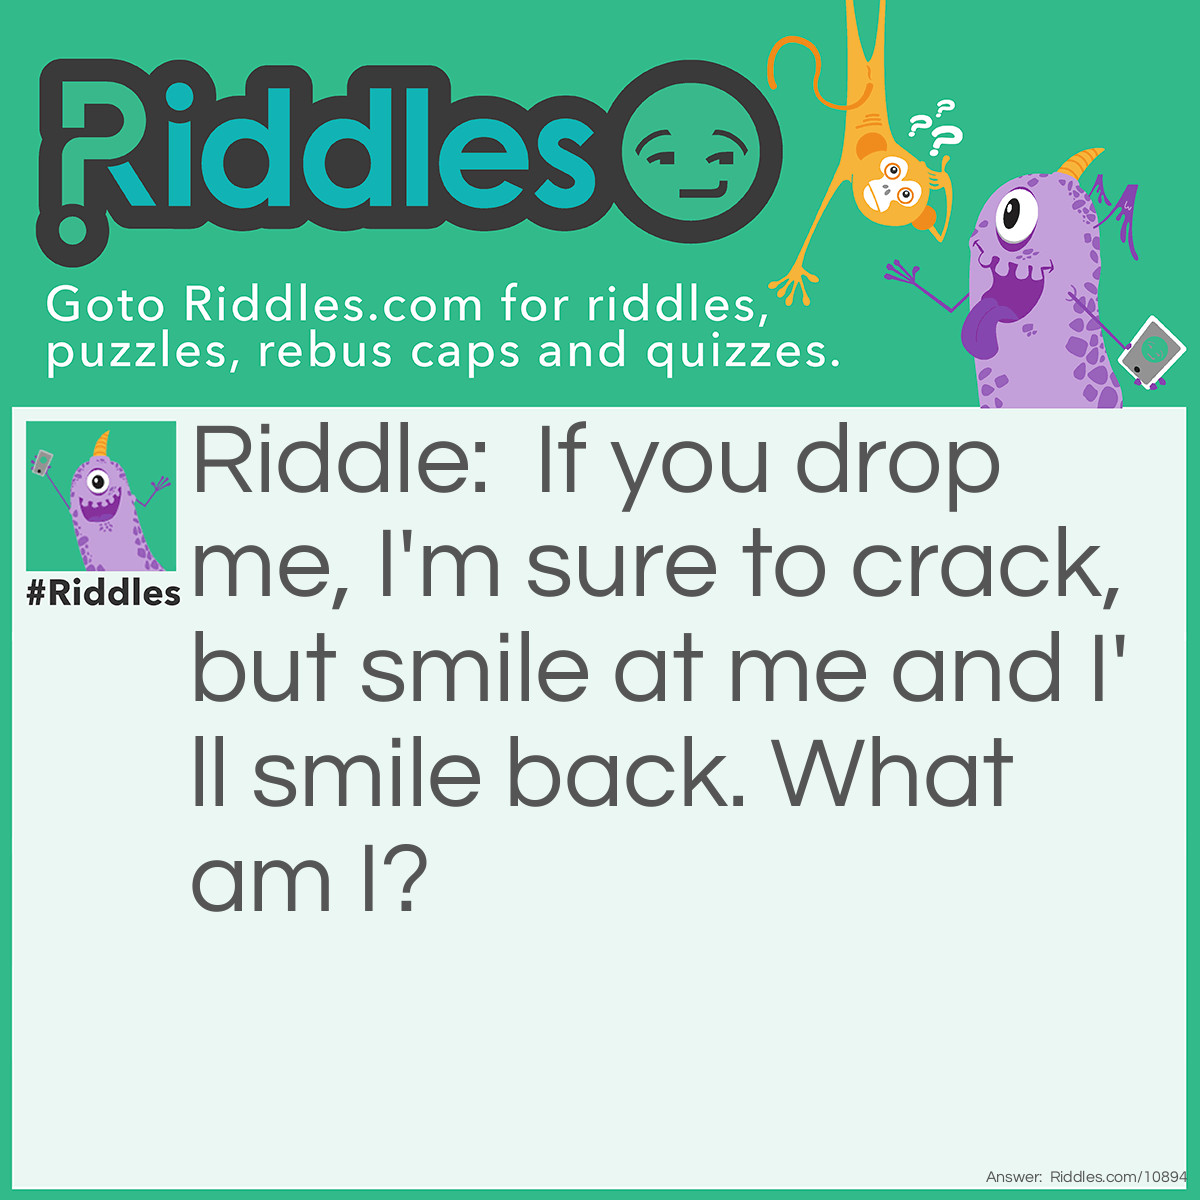 Riddle: If you drop me, I'm sure to crack, but smile at me and I'll smile back. What am I? Answer: A mirror.